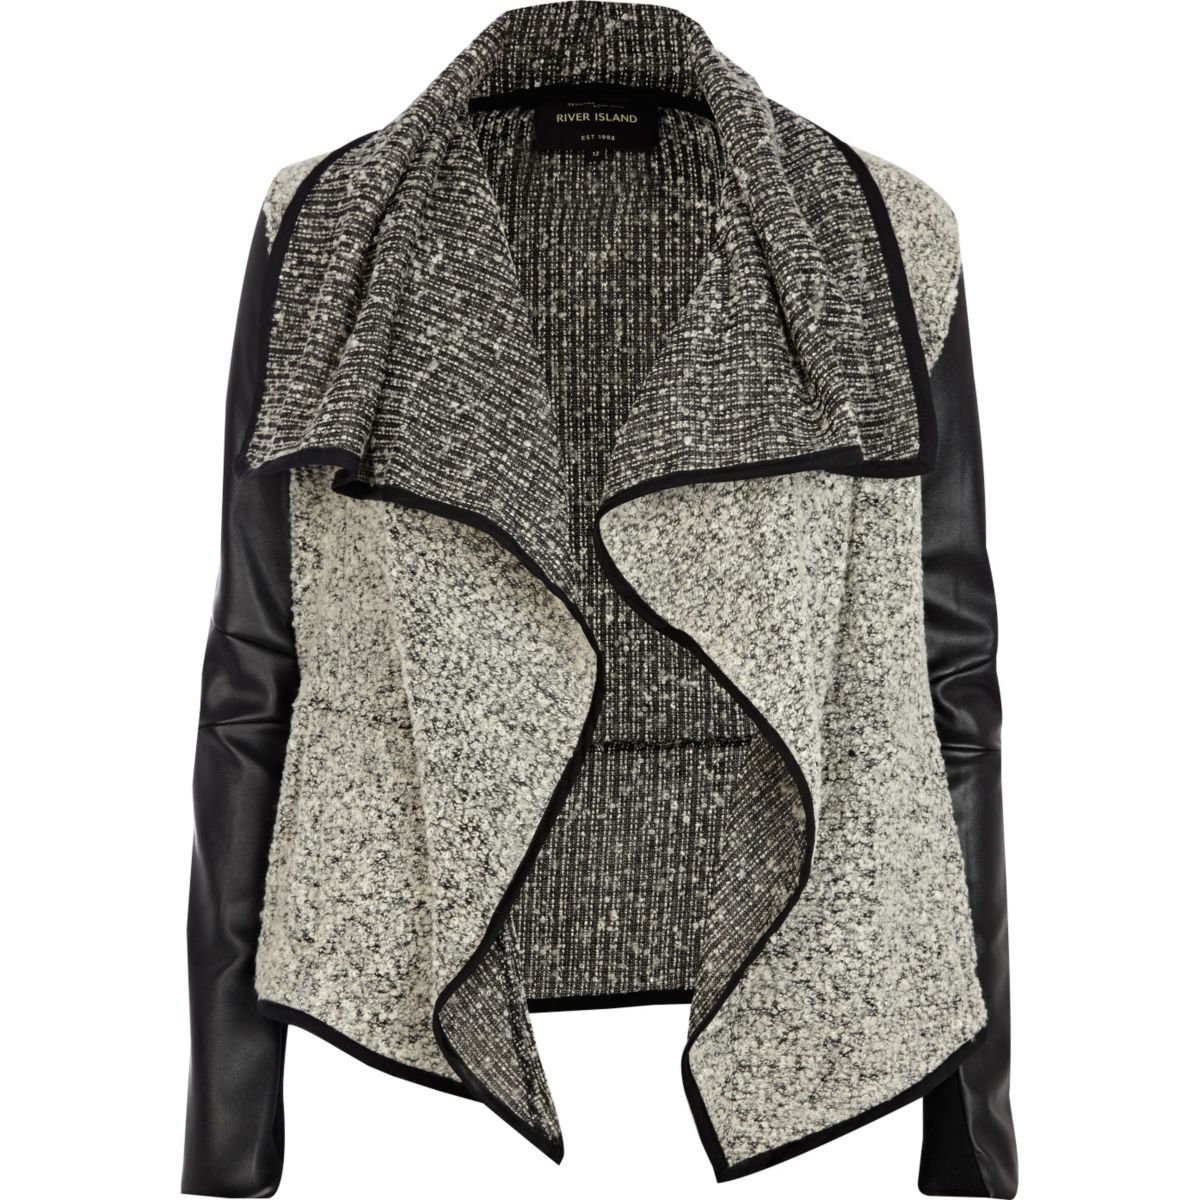 river island size guide mens jacket